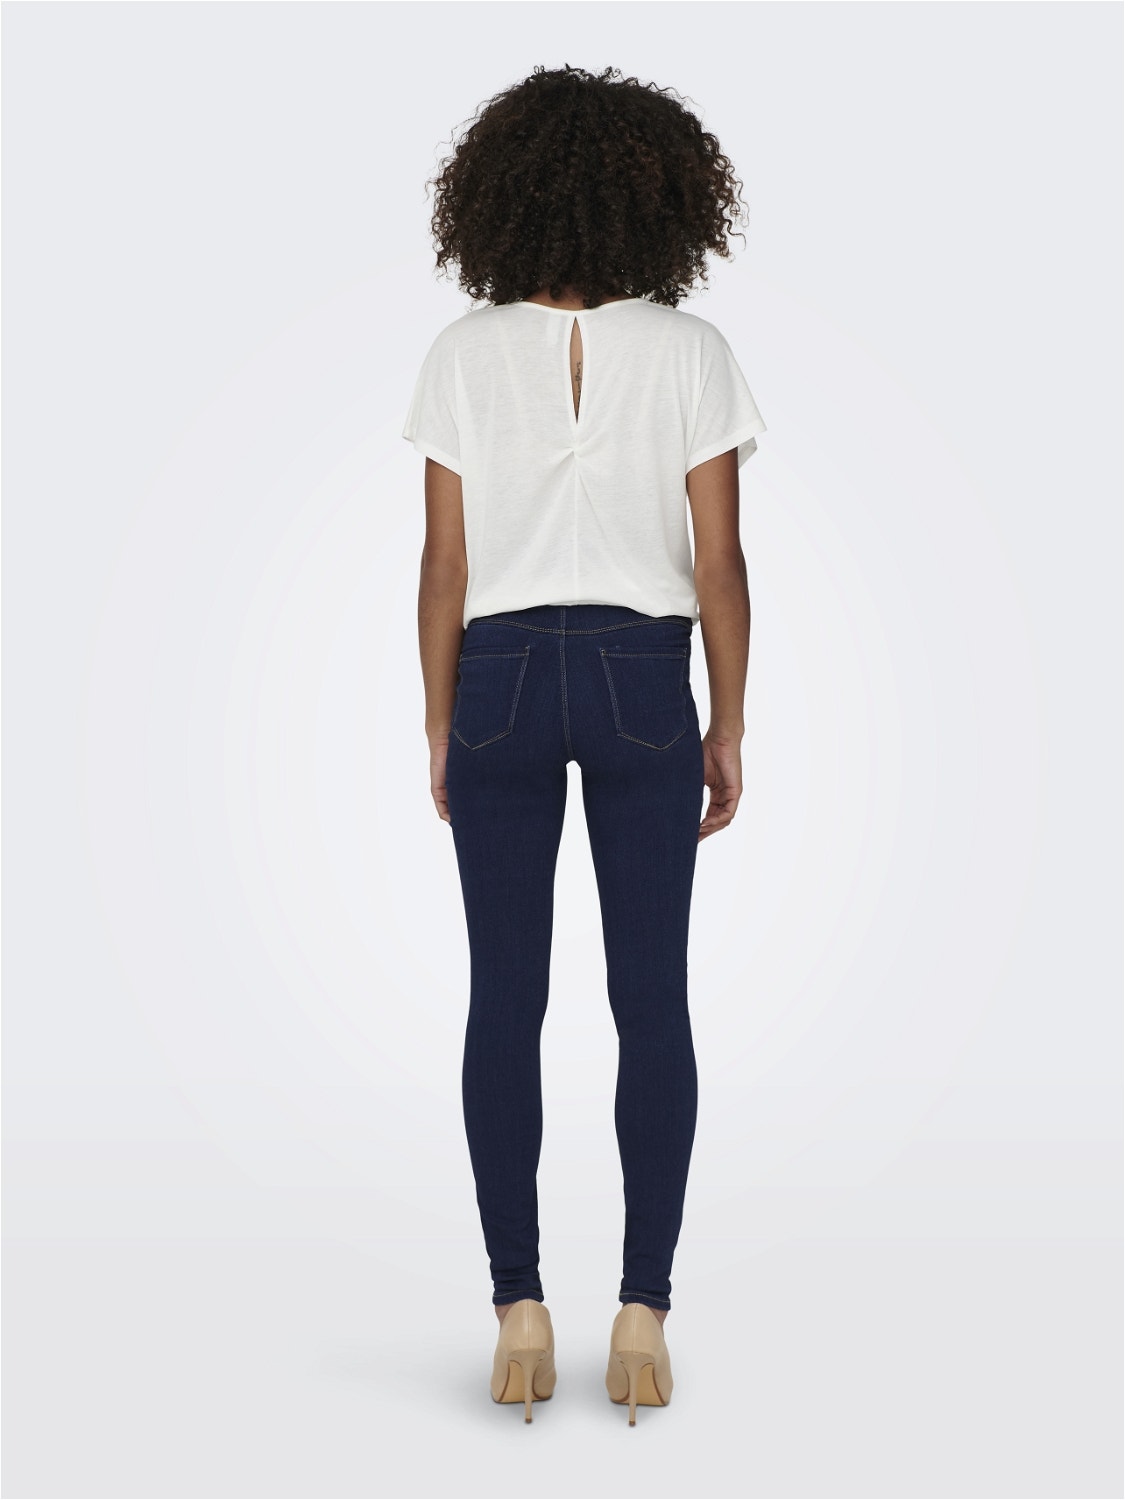 ONLY Jeans Skinny Fit Taille moyenne -Dark Blue Denim - 15255012